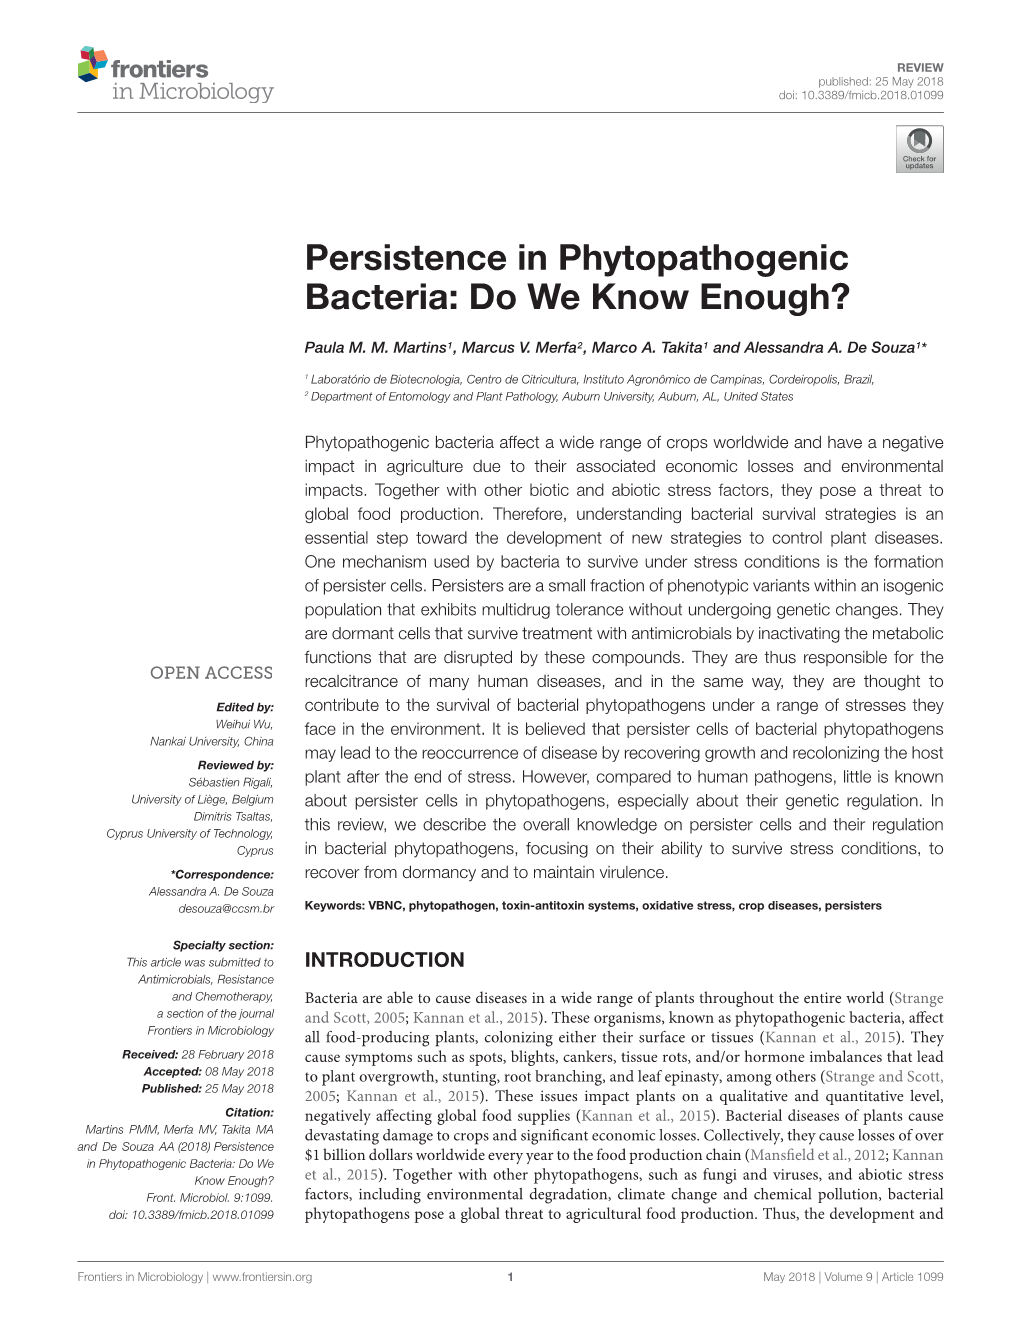 Persistence in Phytopathogenic Bacteria: Do We Know Enough?